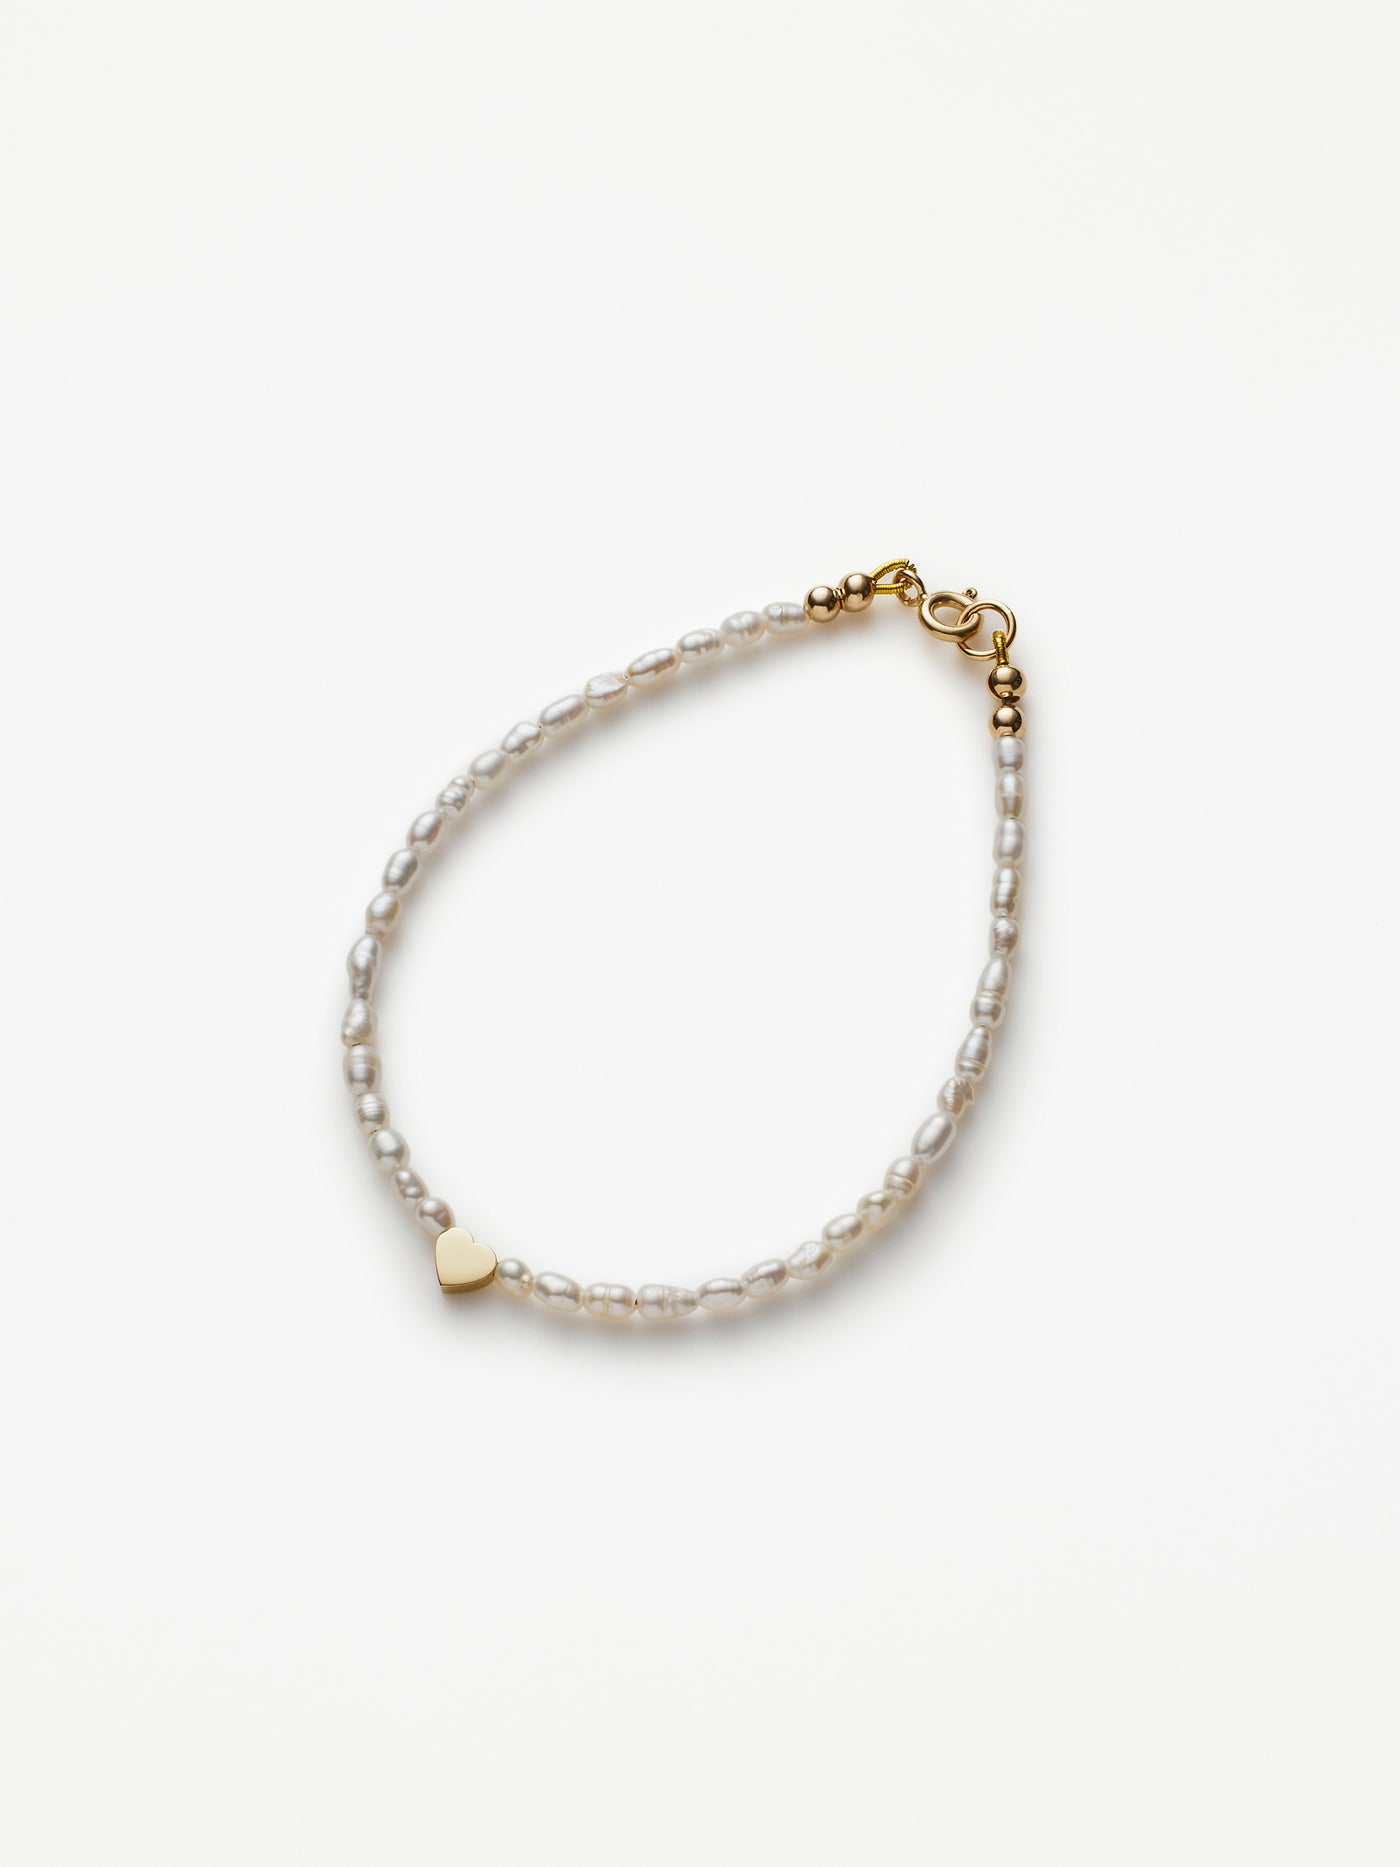 Hand-strung bracelet with natural freshwater pearls and miniature three-dimensional heart in 18k solid gold